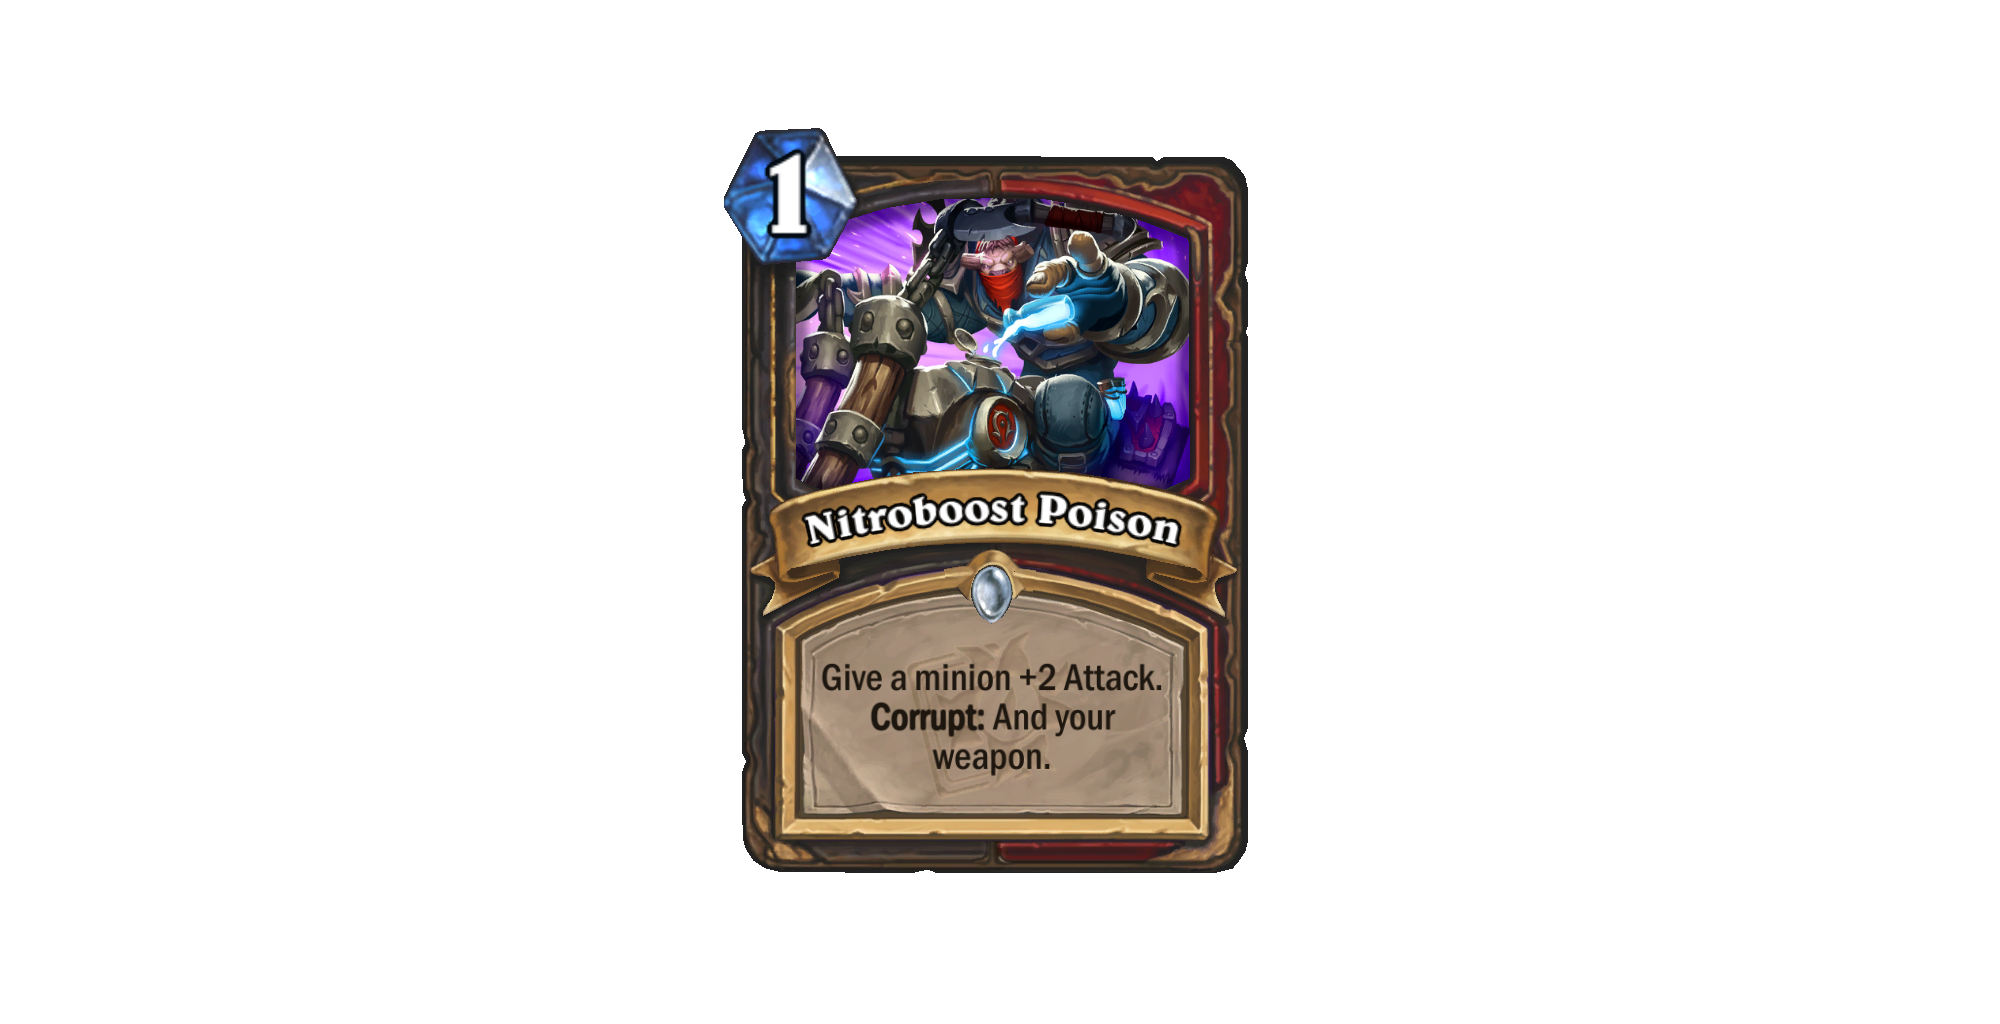 A card from the Darkmoon Races mini-set